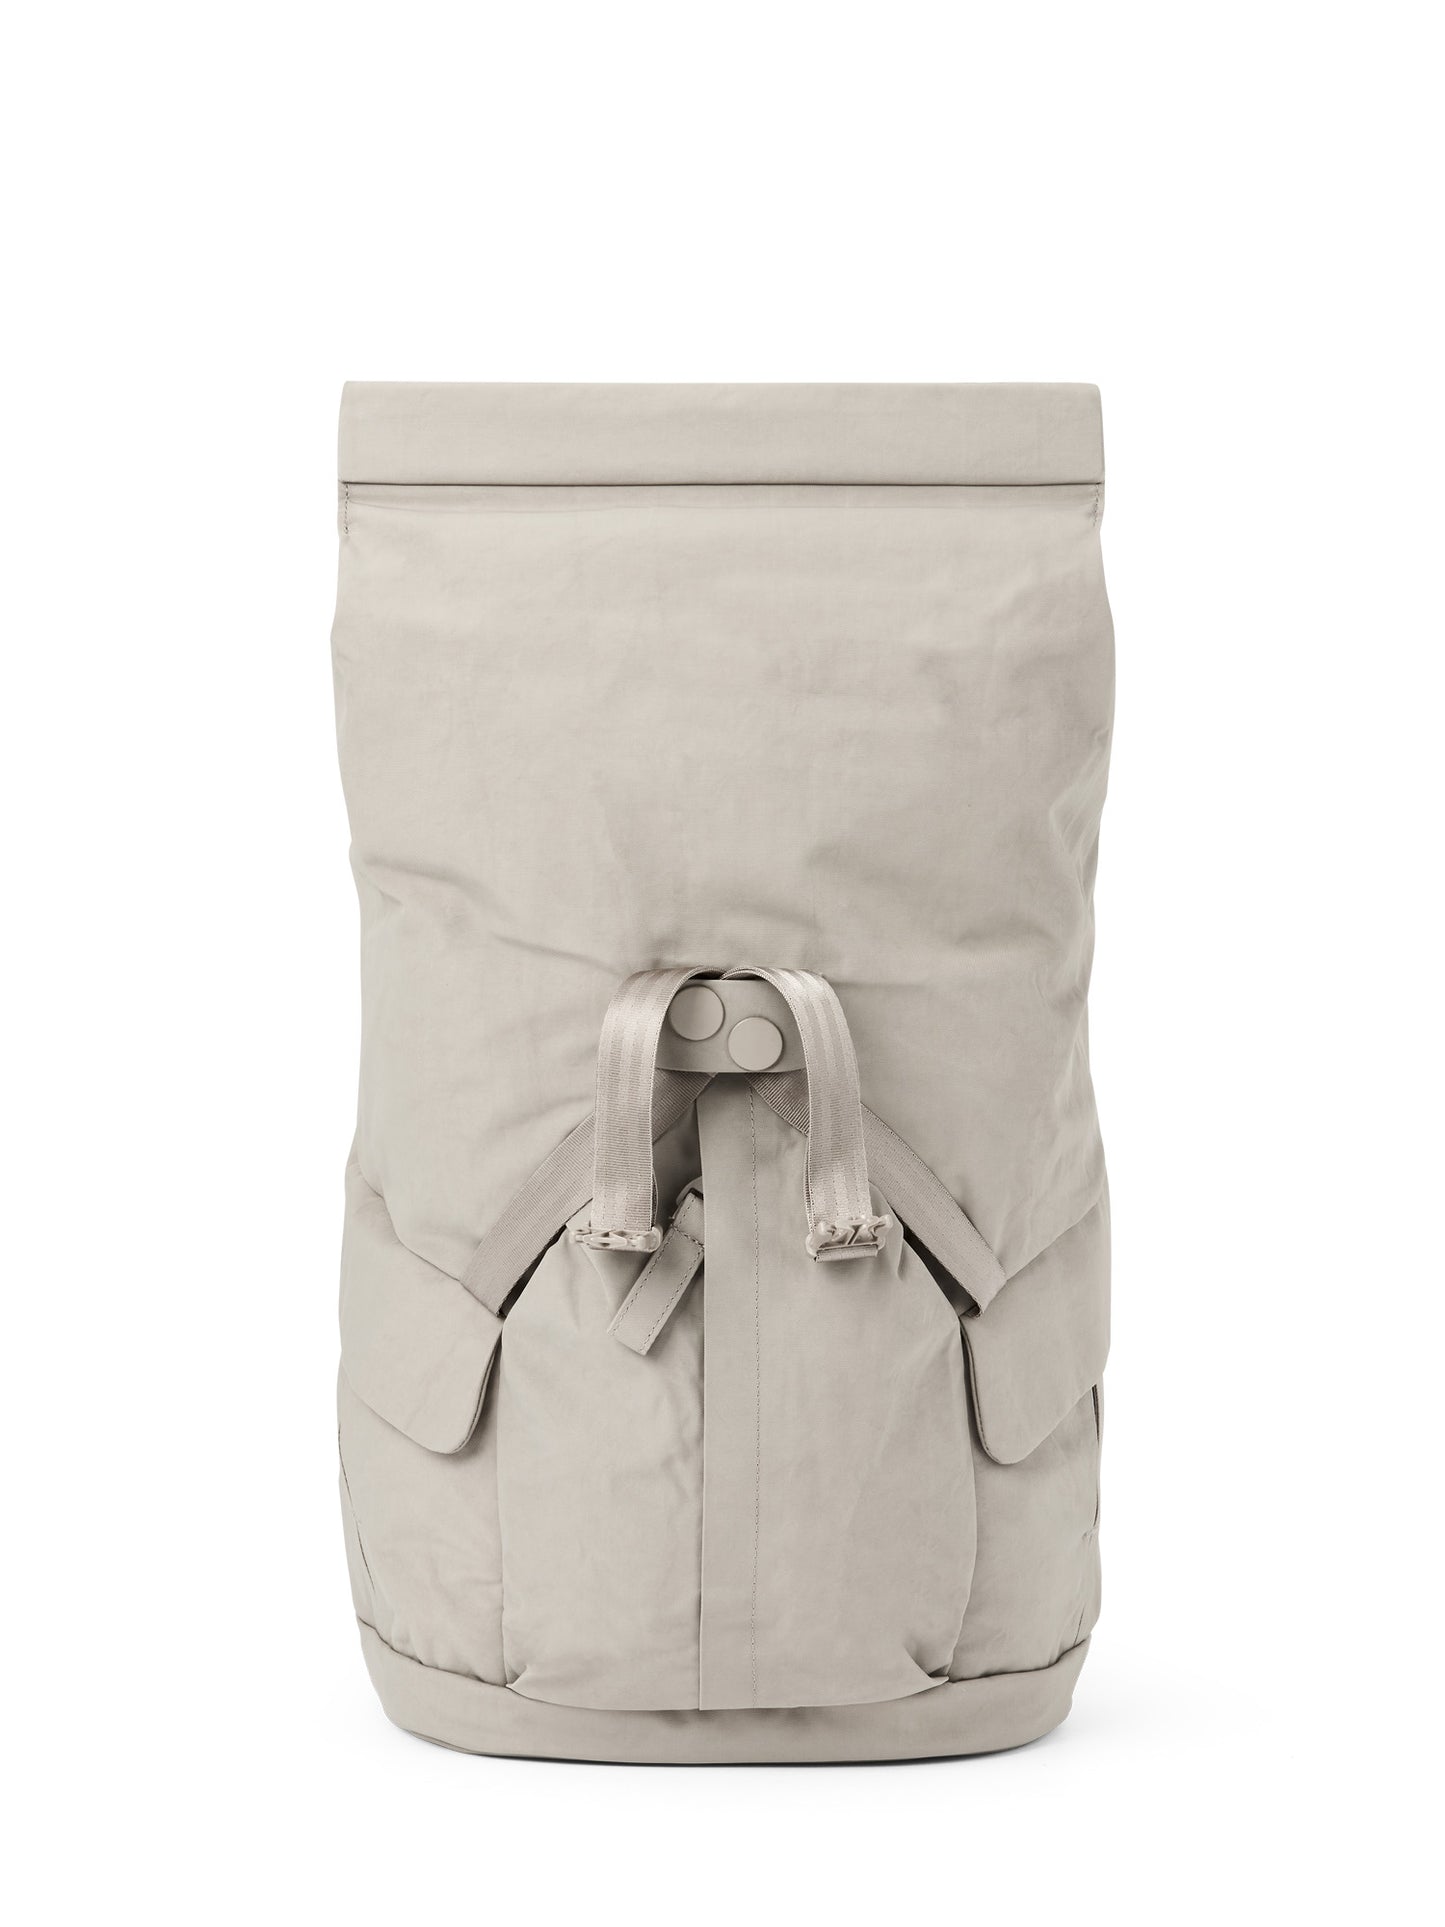 pinqponq-backpack-Kross-Crinkle-Taupe-open